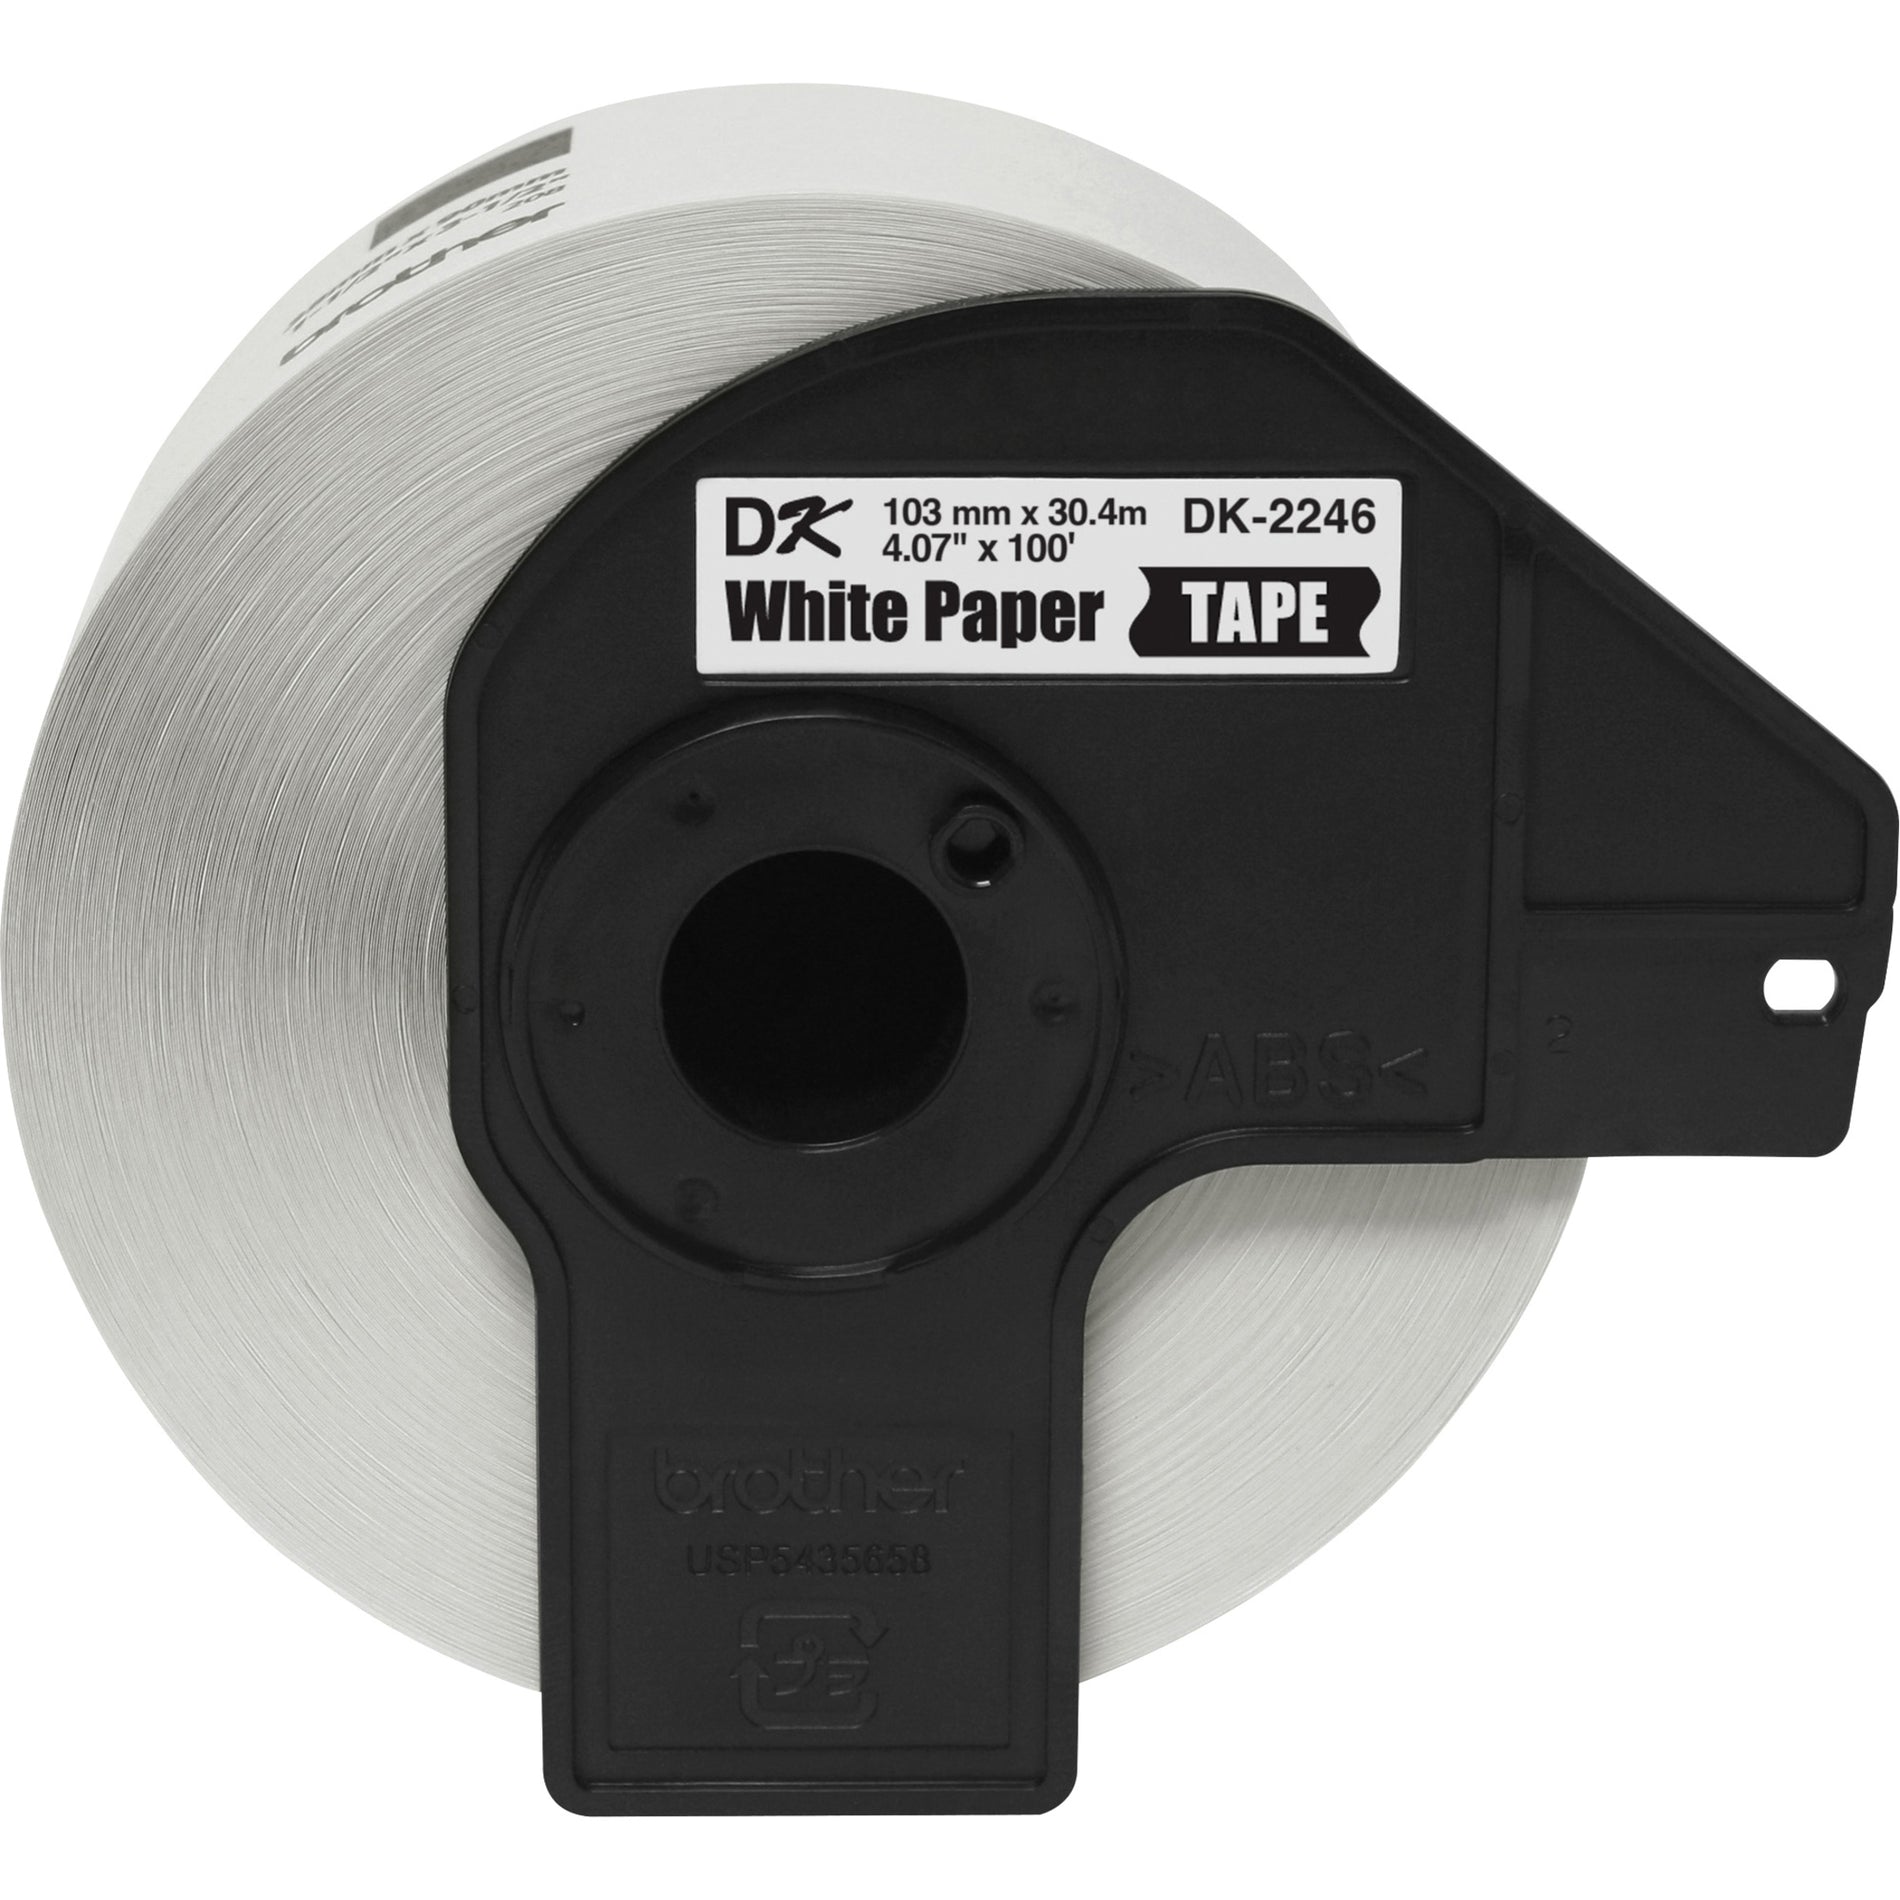 Brother DK2246 Multipurpose Label, Printable, 4 1/16" x 100 ft, White, UL Listed Certification